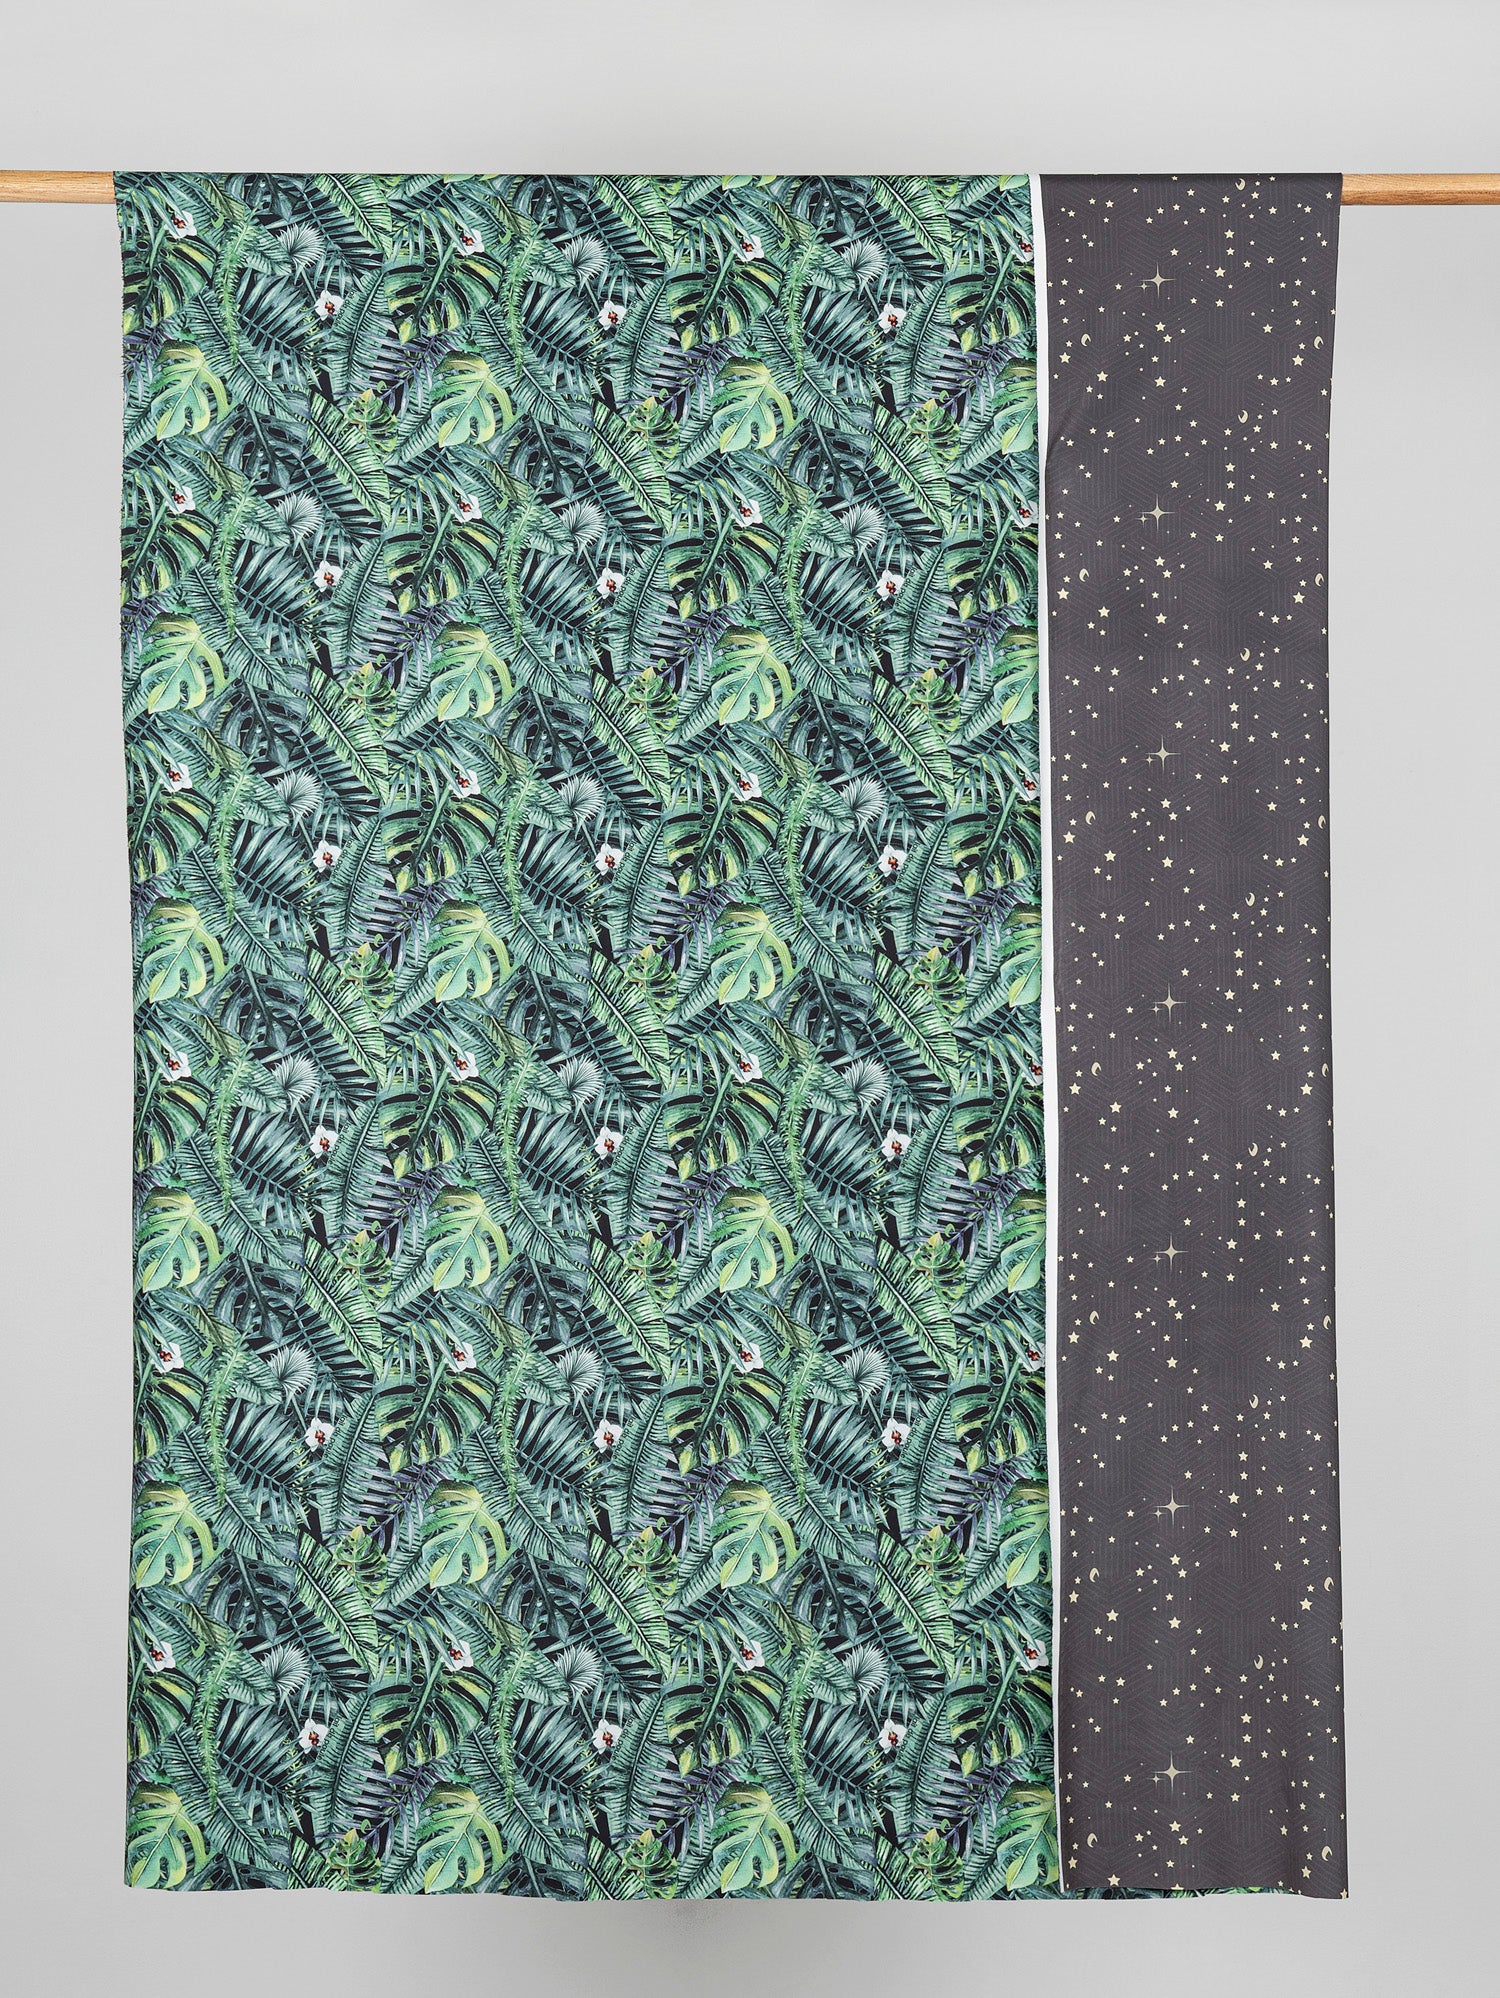 Tropical Leaf Star Reversible Stretch Knit Deadstock - Black + Green | Core Fabrics